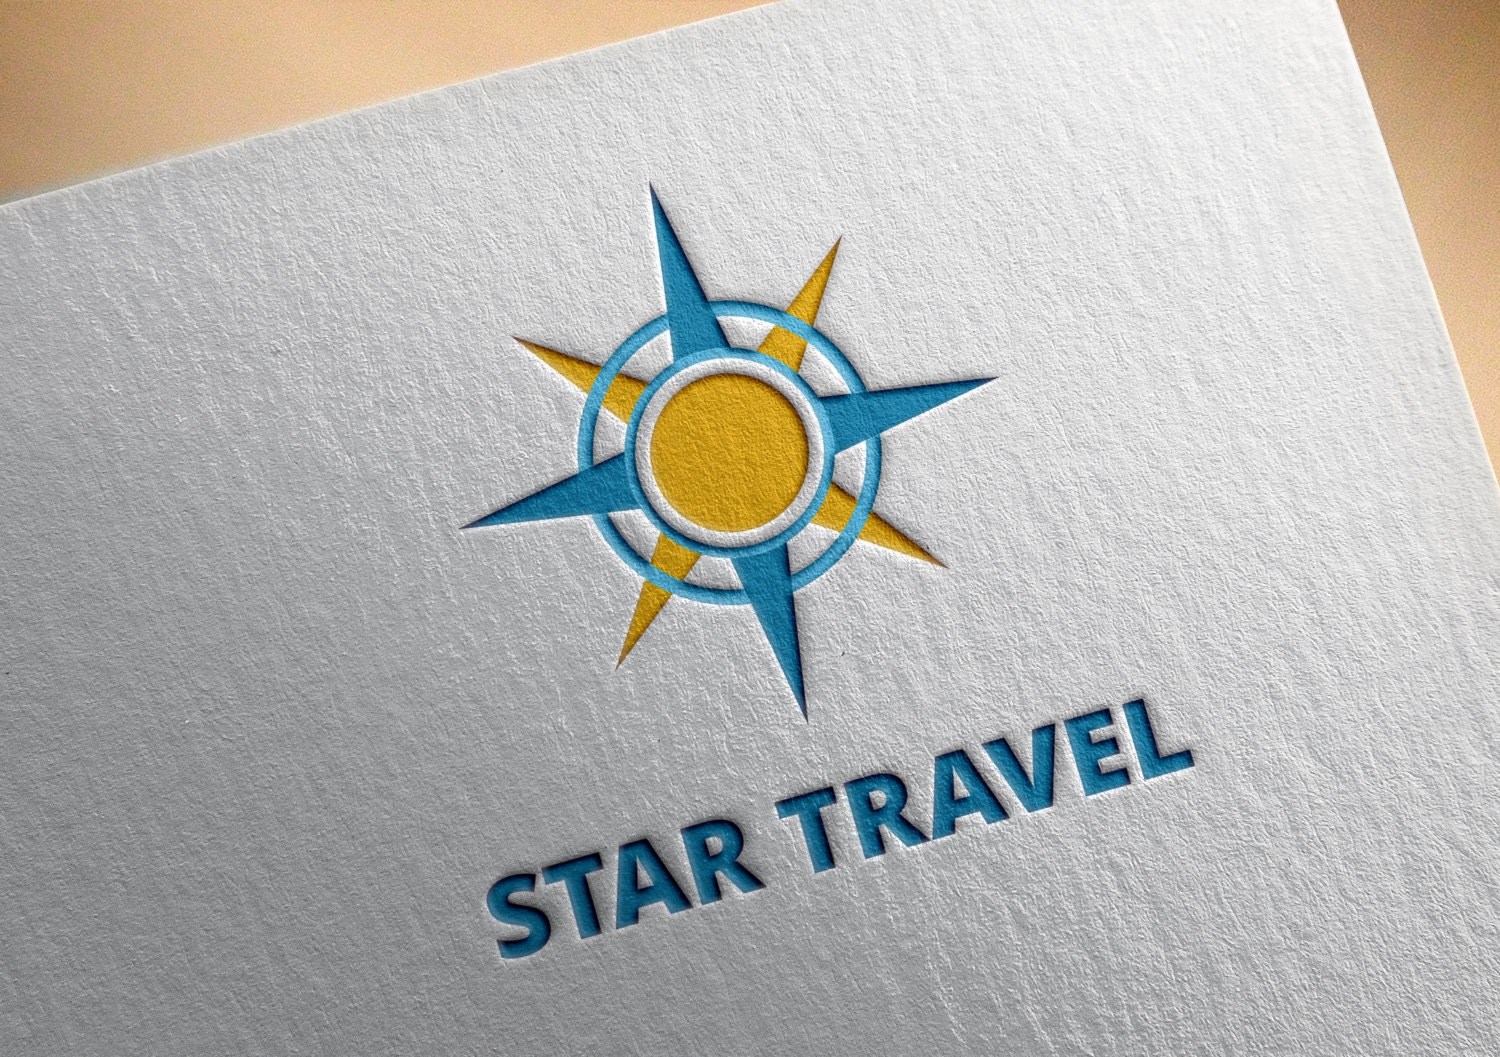 star travel and agency